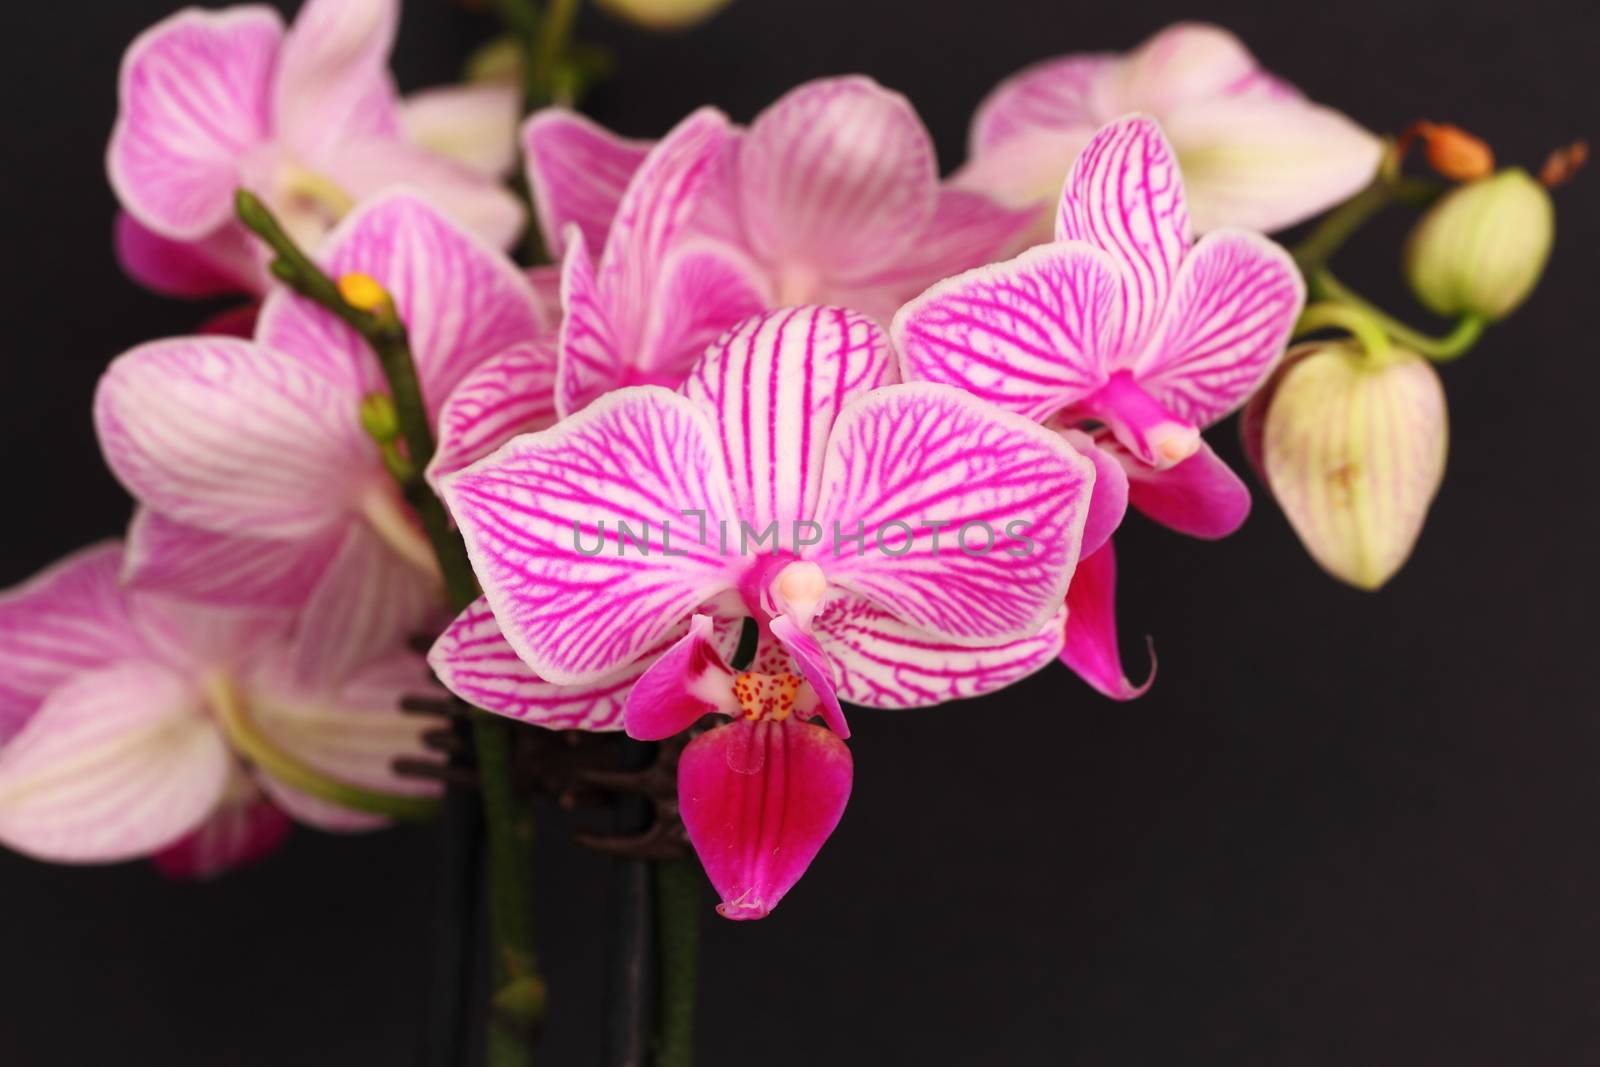 Phalaenopsis orchid by mitzy